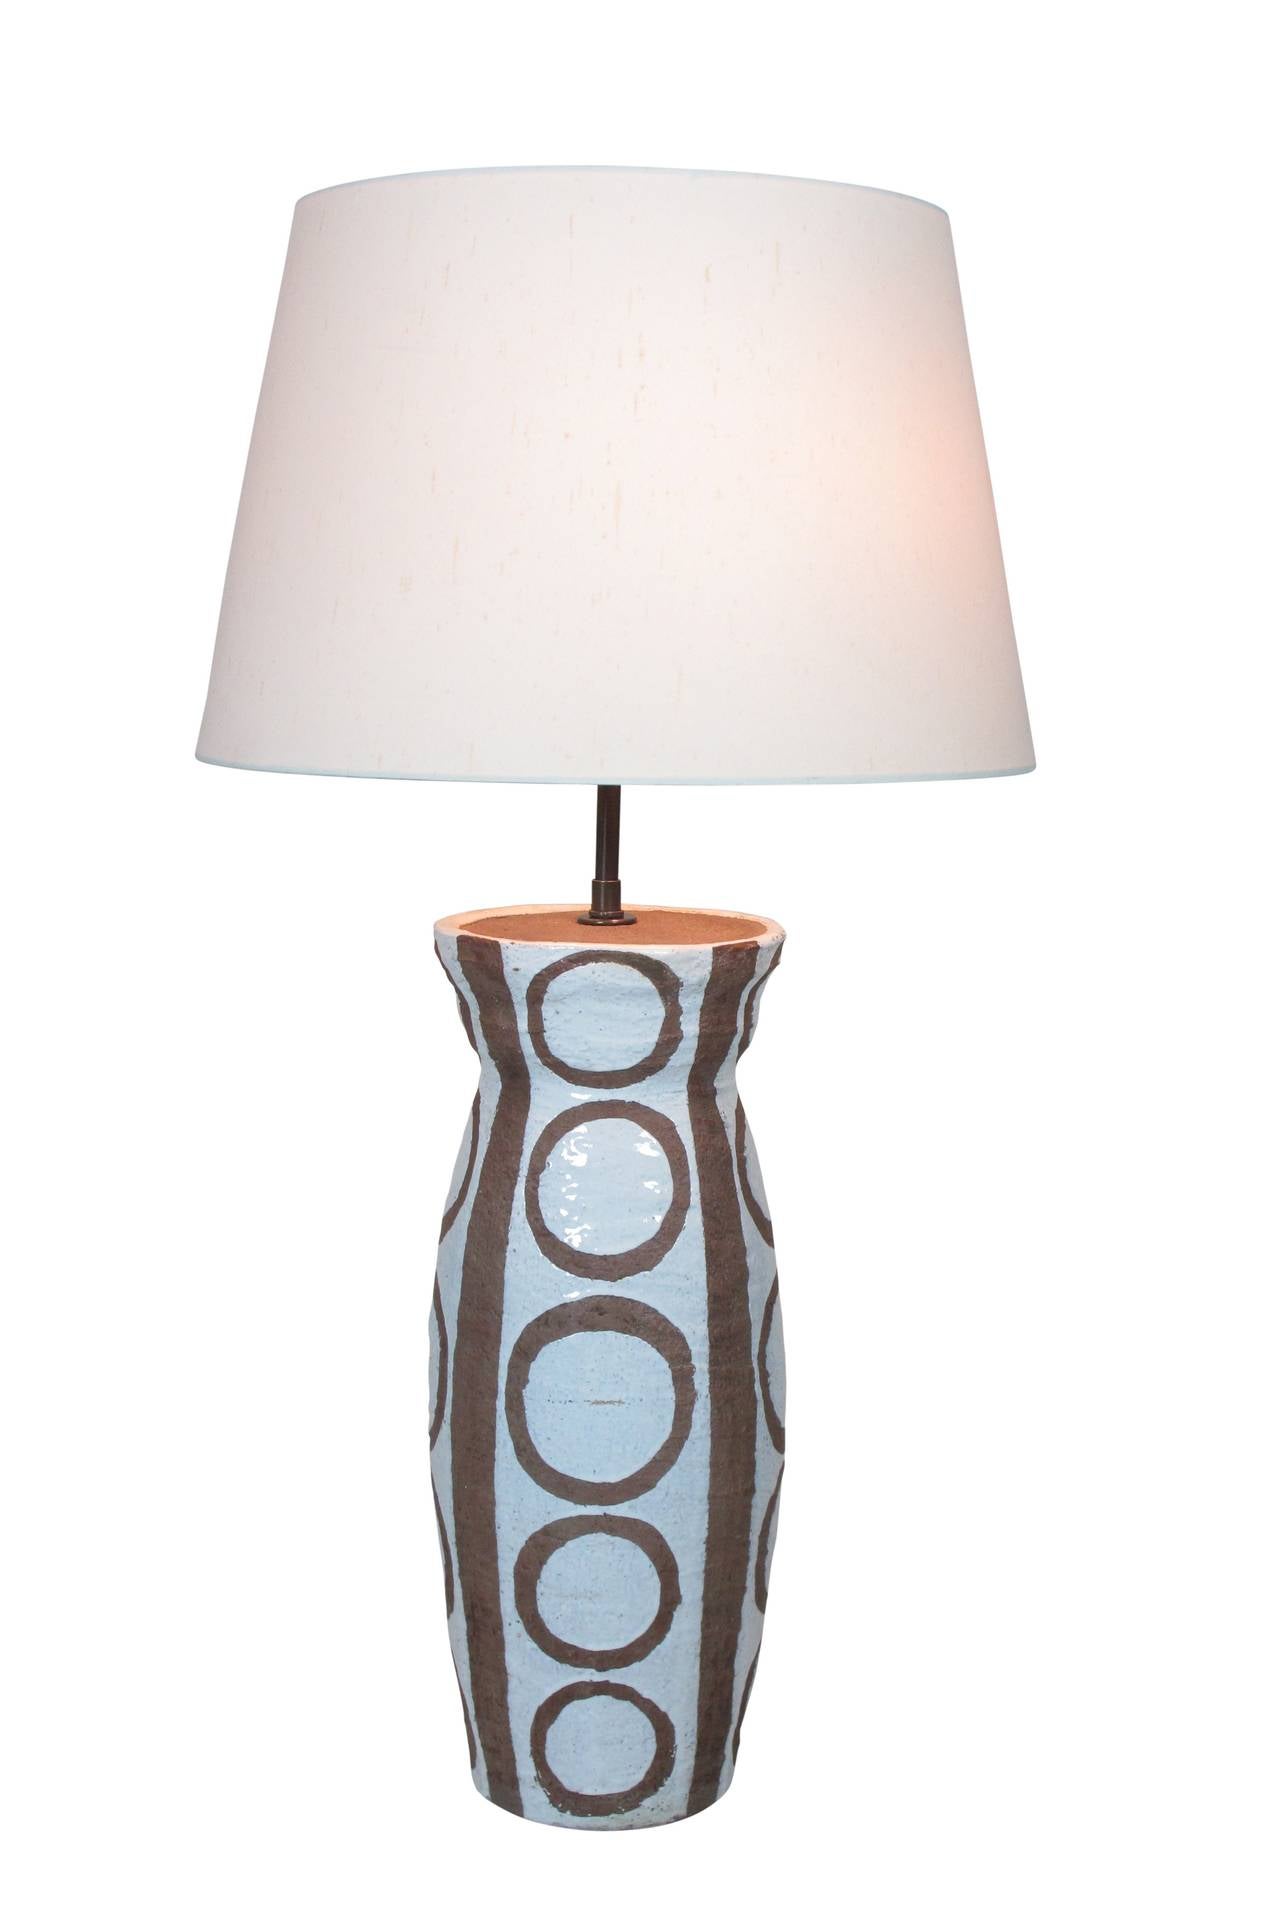 Chocolate glazed circle pattern over white glaze hand-thrown ceramic table lamp. Rewired for immediate use. Ceramic only measures 18.5 inches. Top measures 7